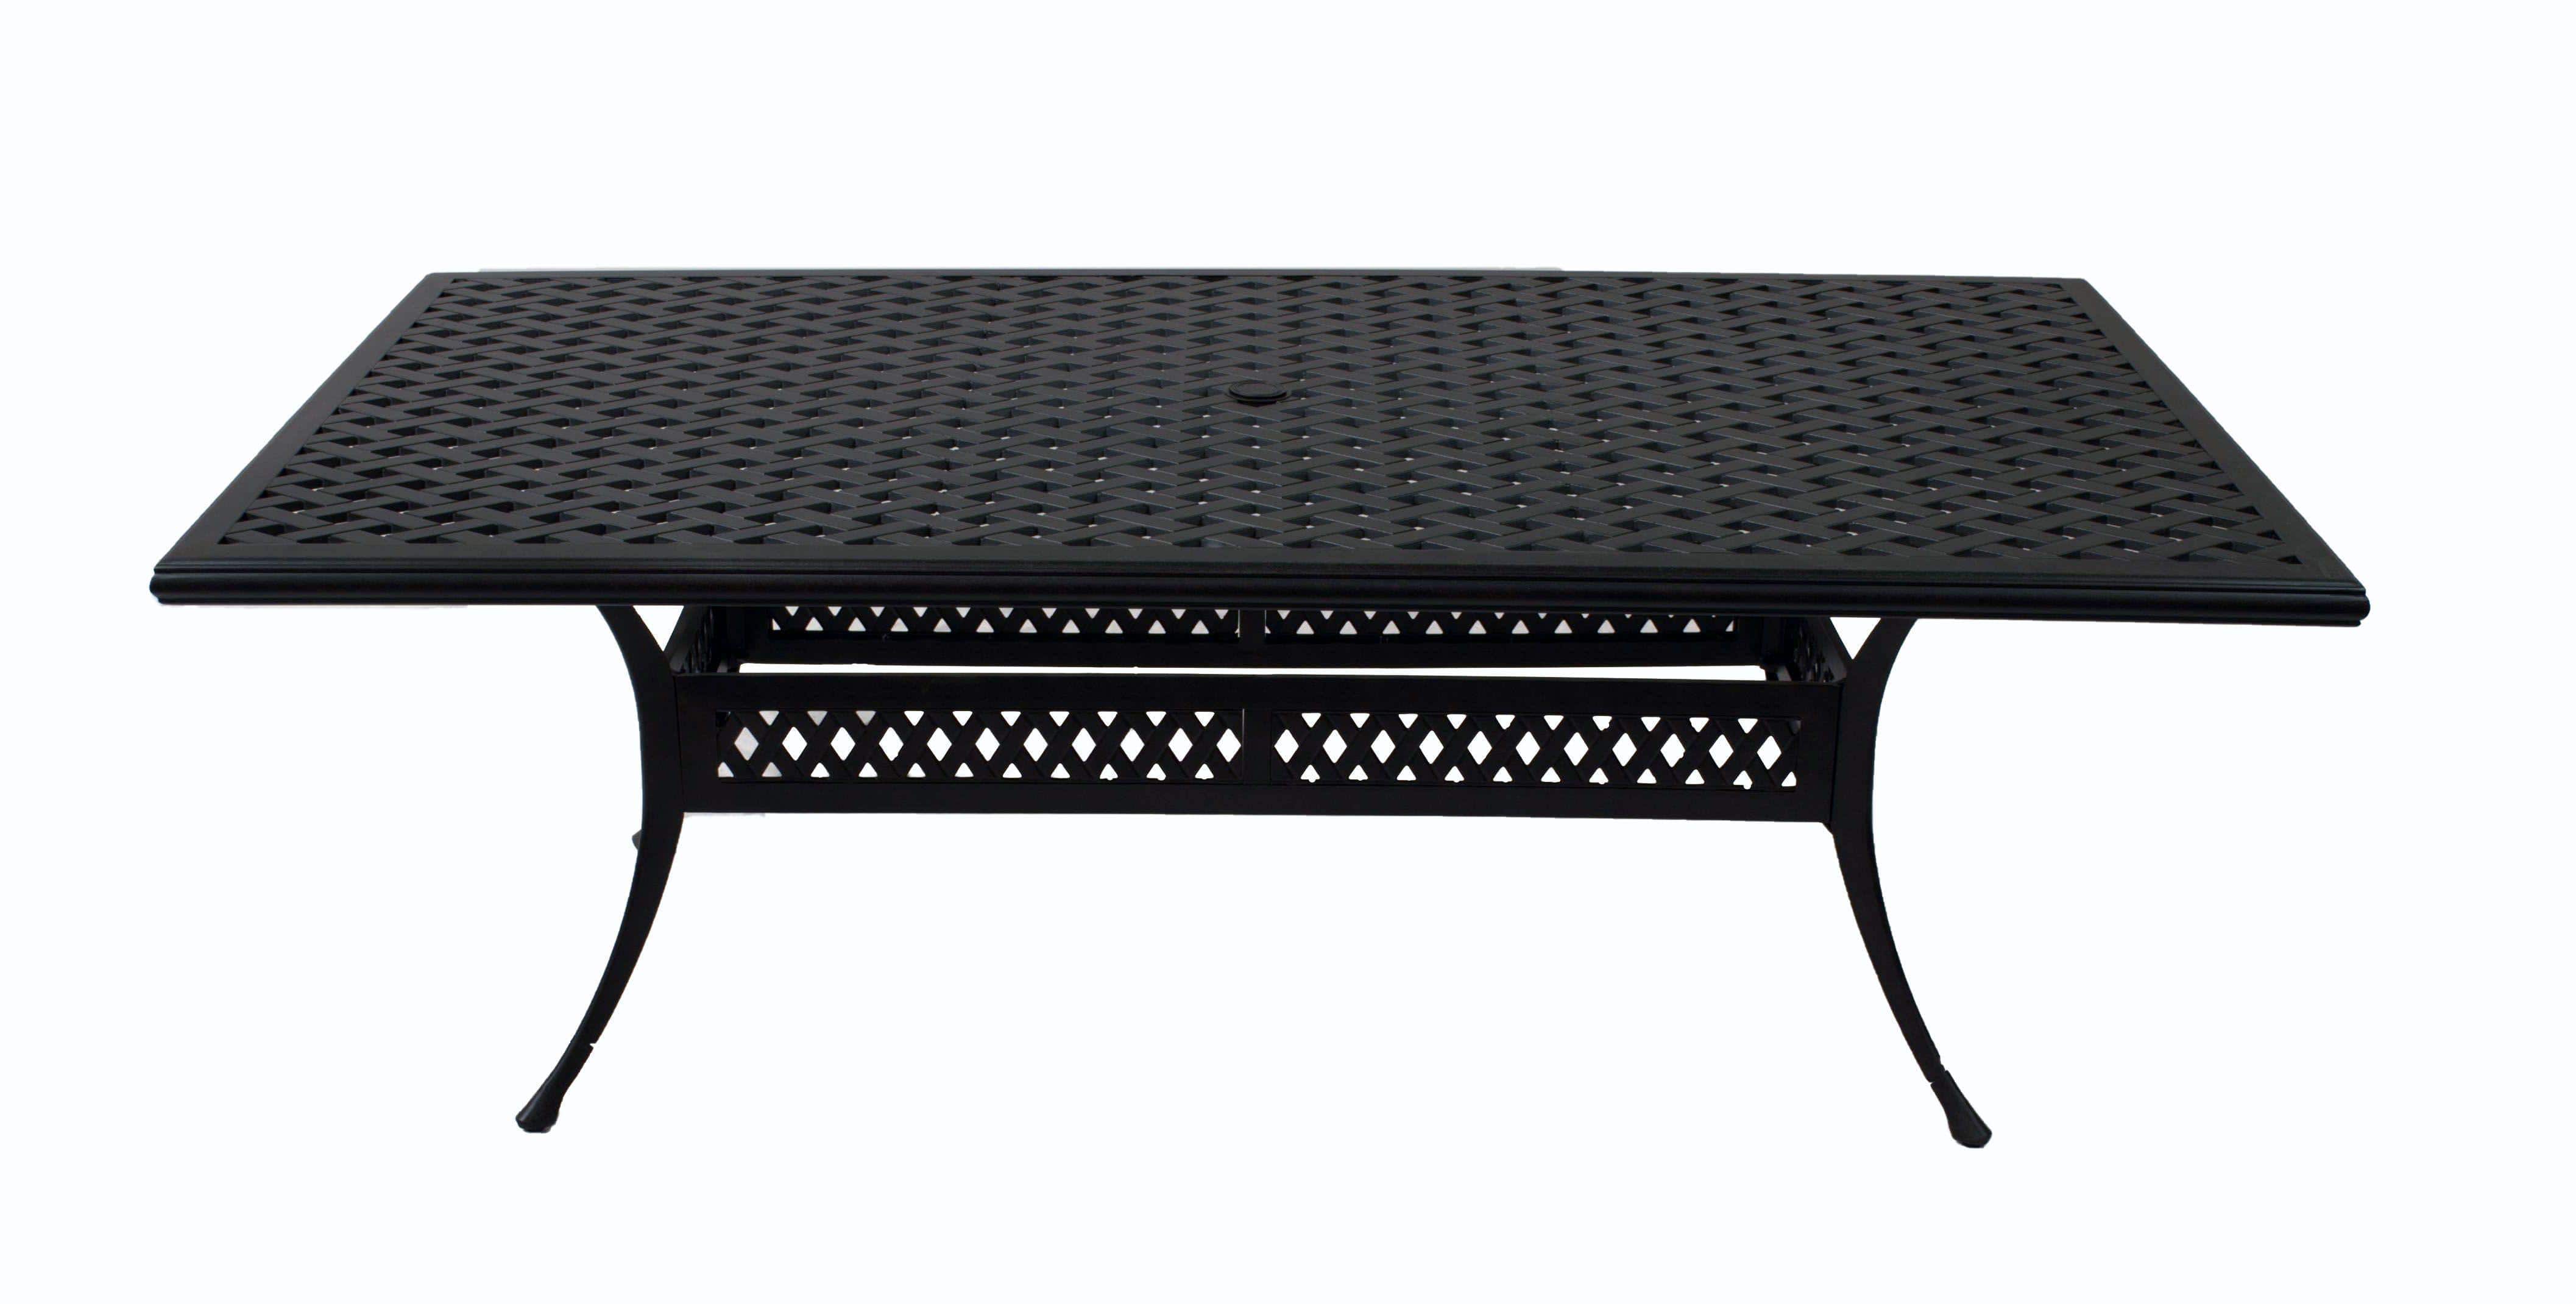 Lawton Casual Comfort Outdoor Dining Table Lawton Casual Comfort - 86" X 46" Rectangle Dining Table Weave